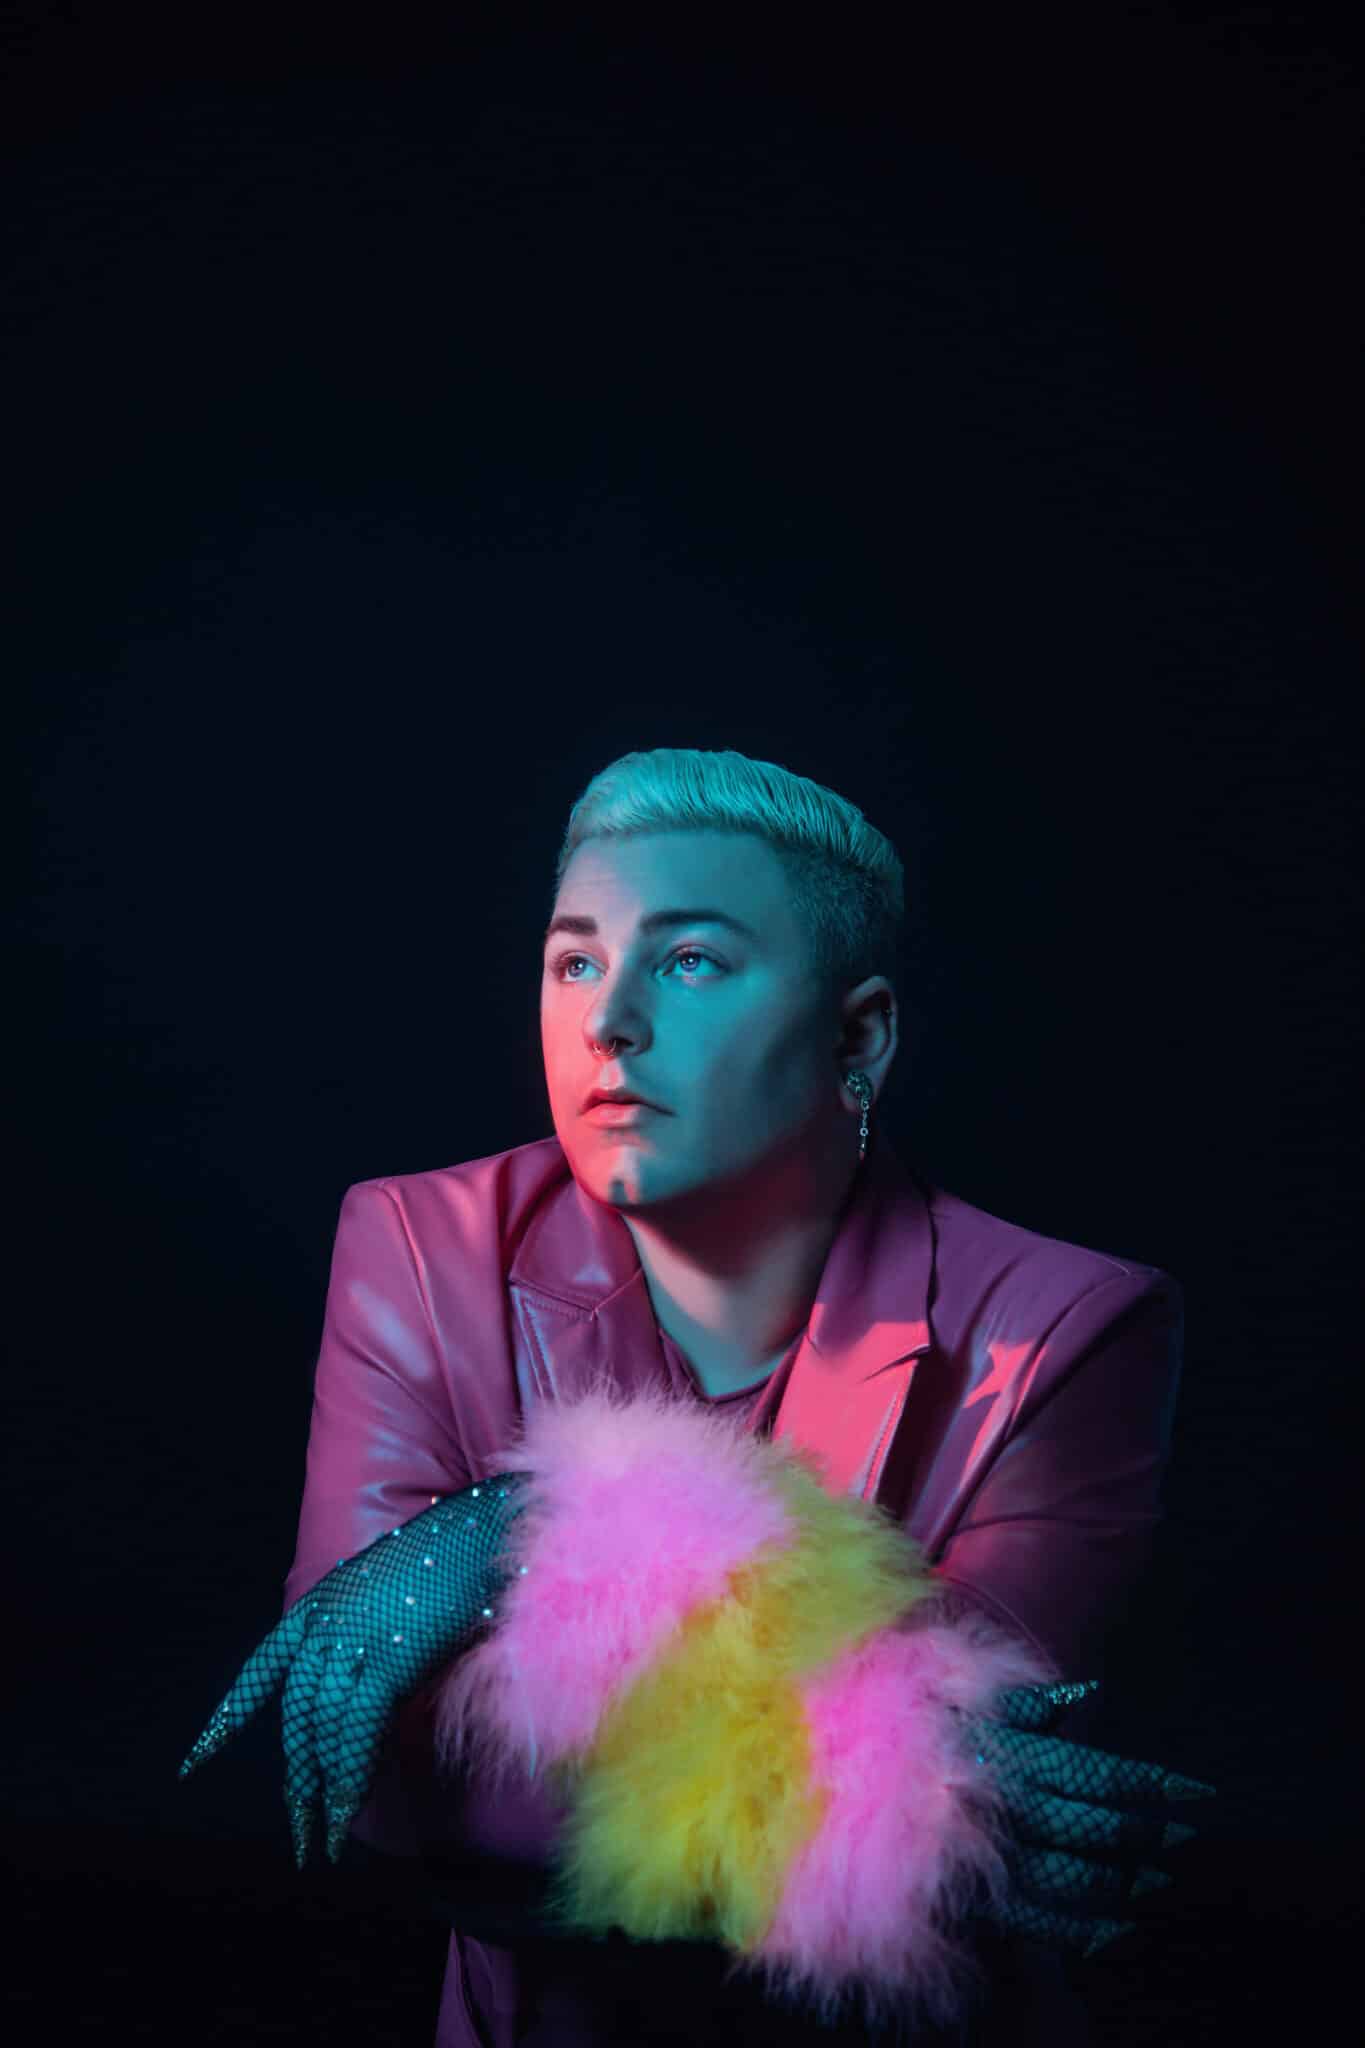 Pop artist Dead Method poses against a dark background wearing a pink suit. 